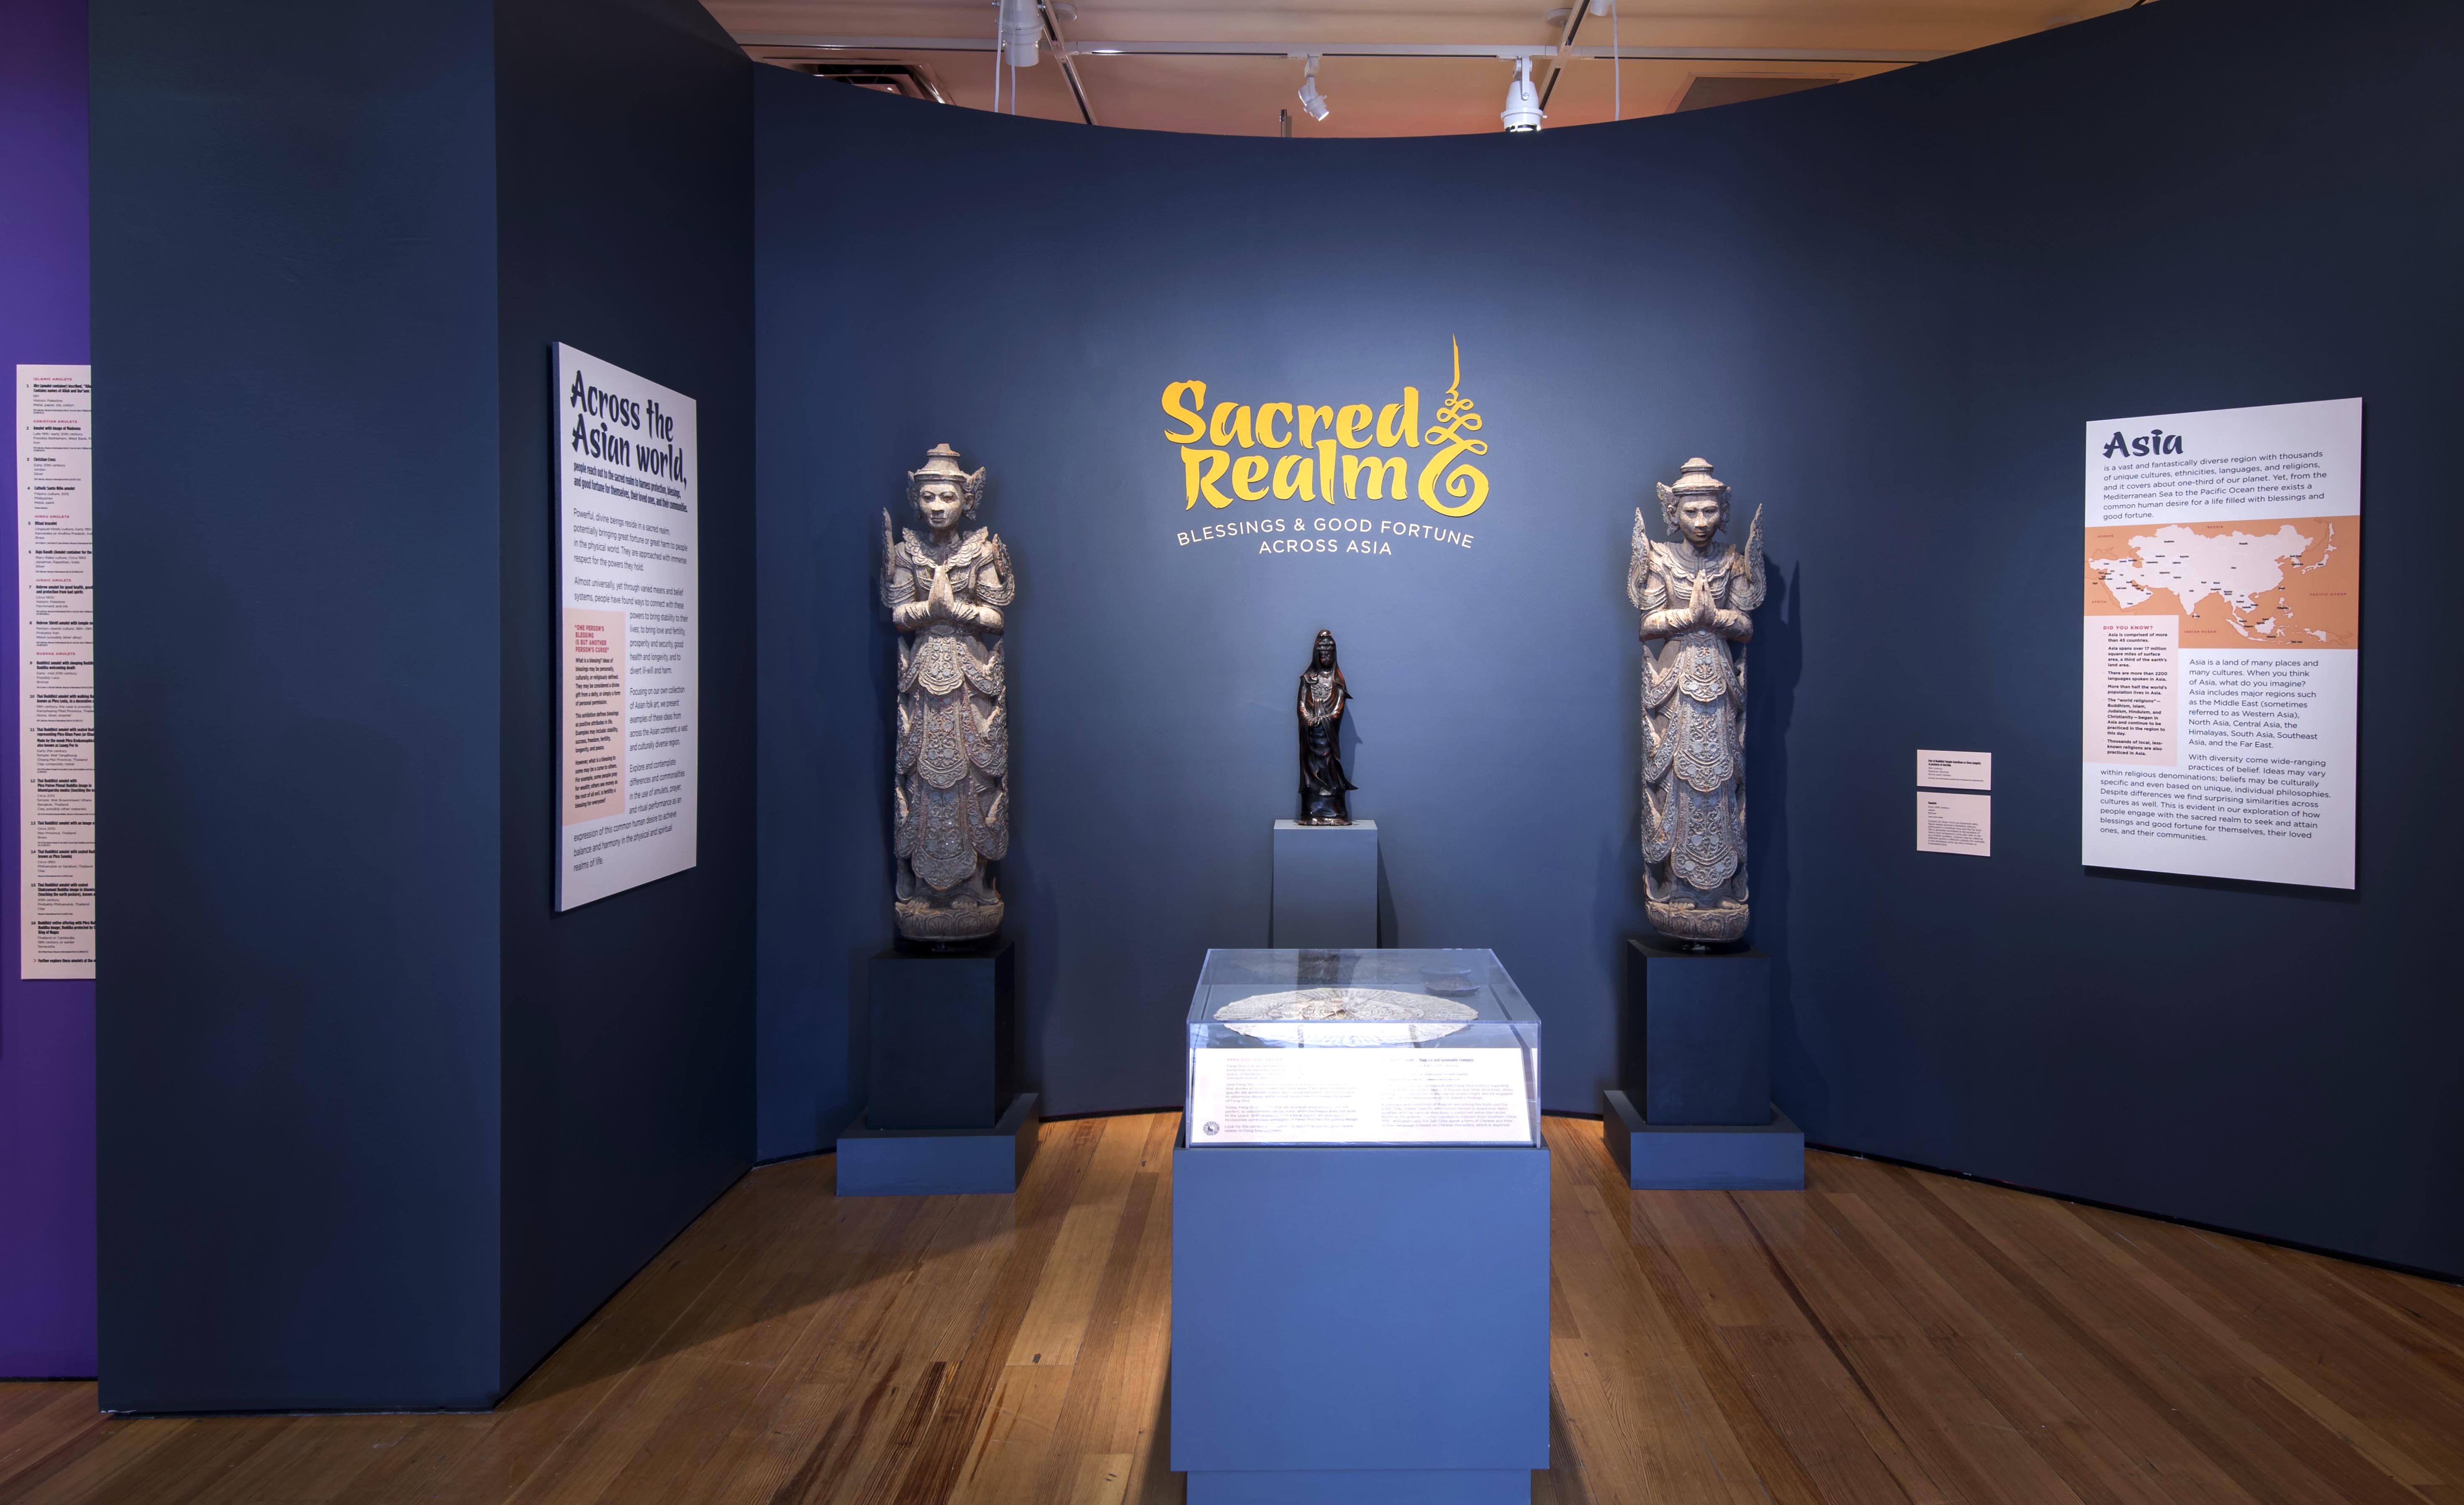 Entrance to the exhibition Sacred Realm: Blessings and Good Fortune across Asia